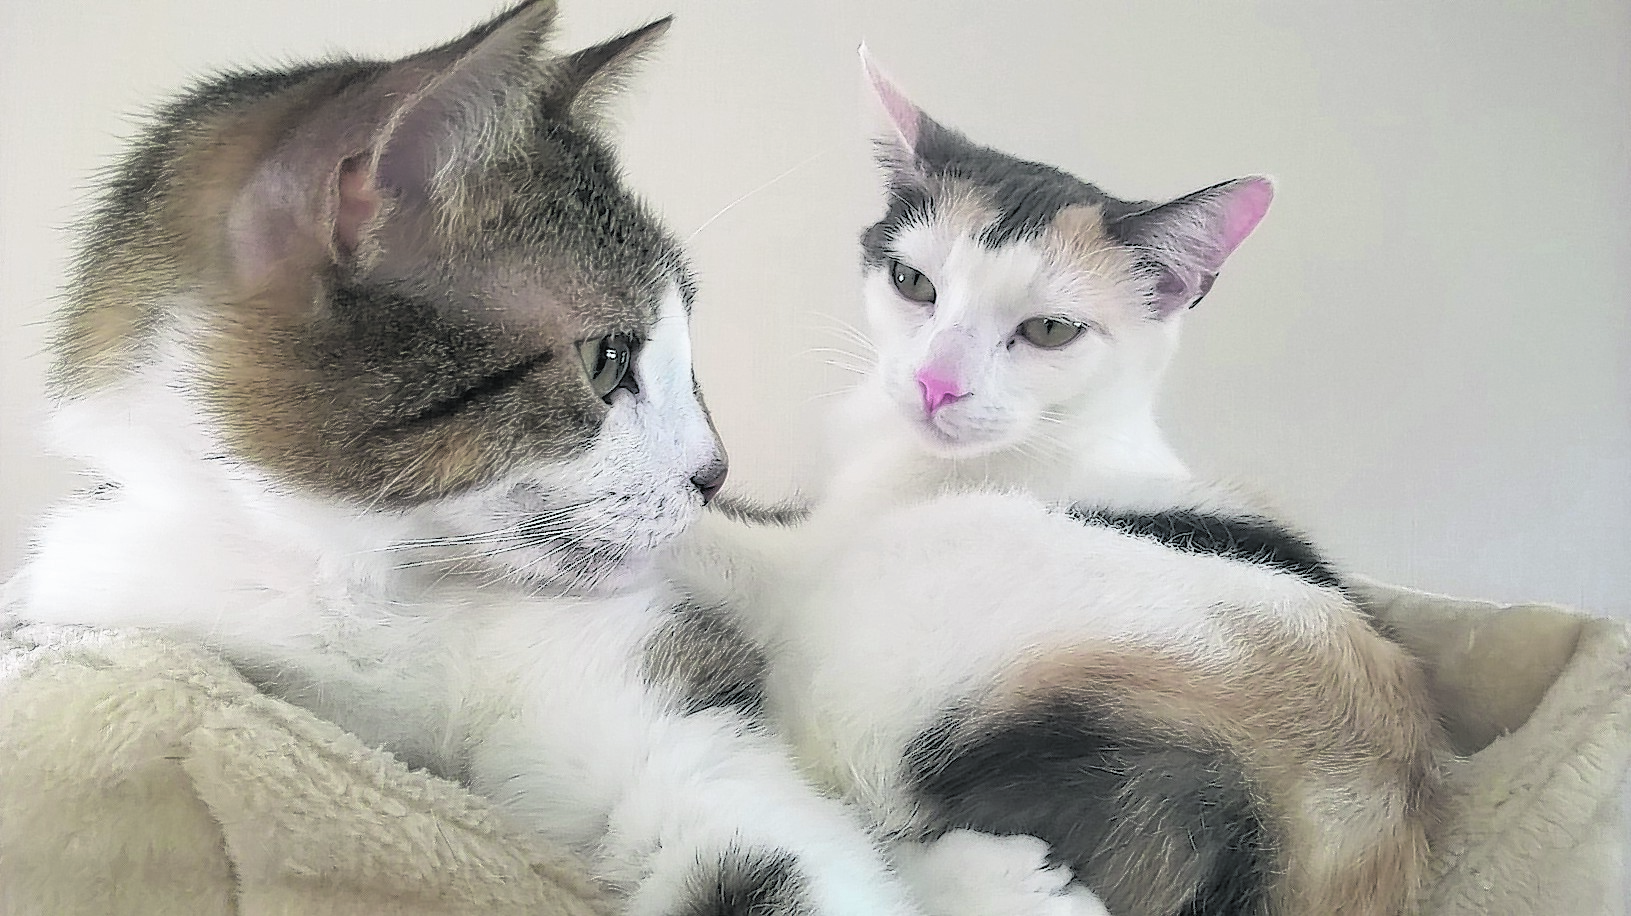 Odin (Tabby) and Isis (Callico) were recently adopted from the local Cat Protection centre as a pair. They are 21 months old and have been together since kittens. They live with the Hoskins family in Hallglen, Falkirk.